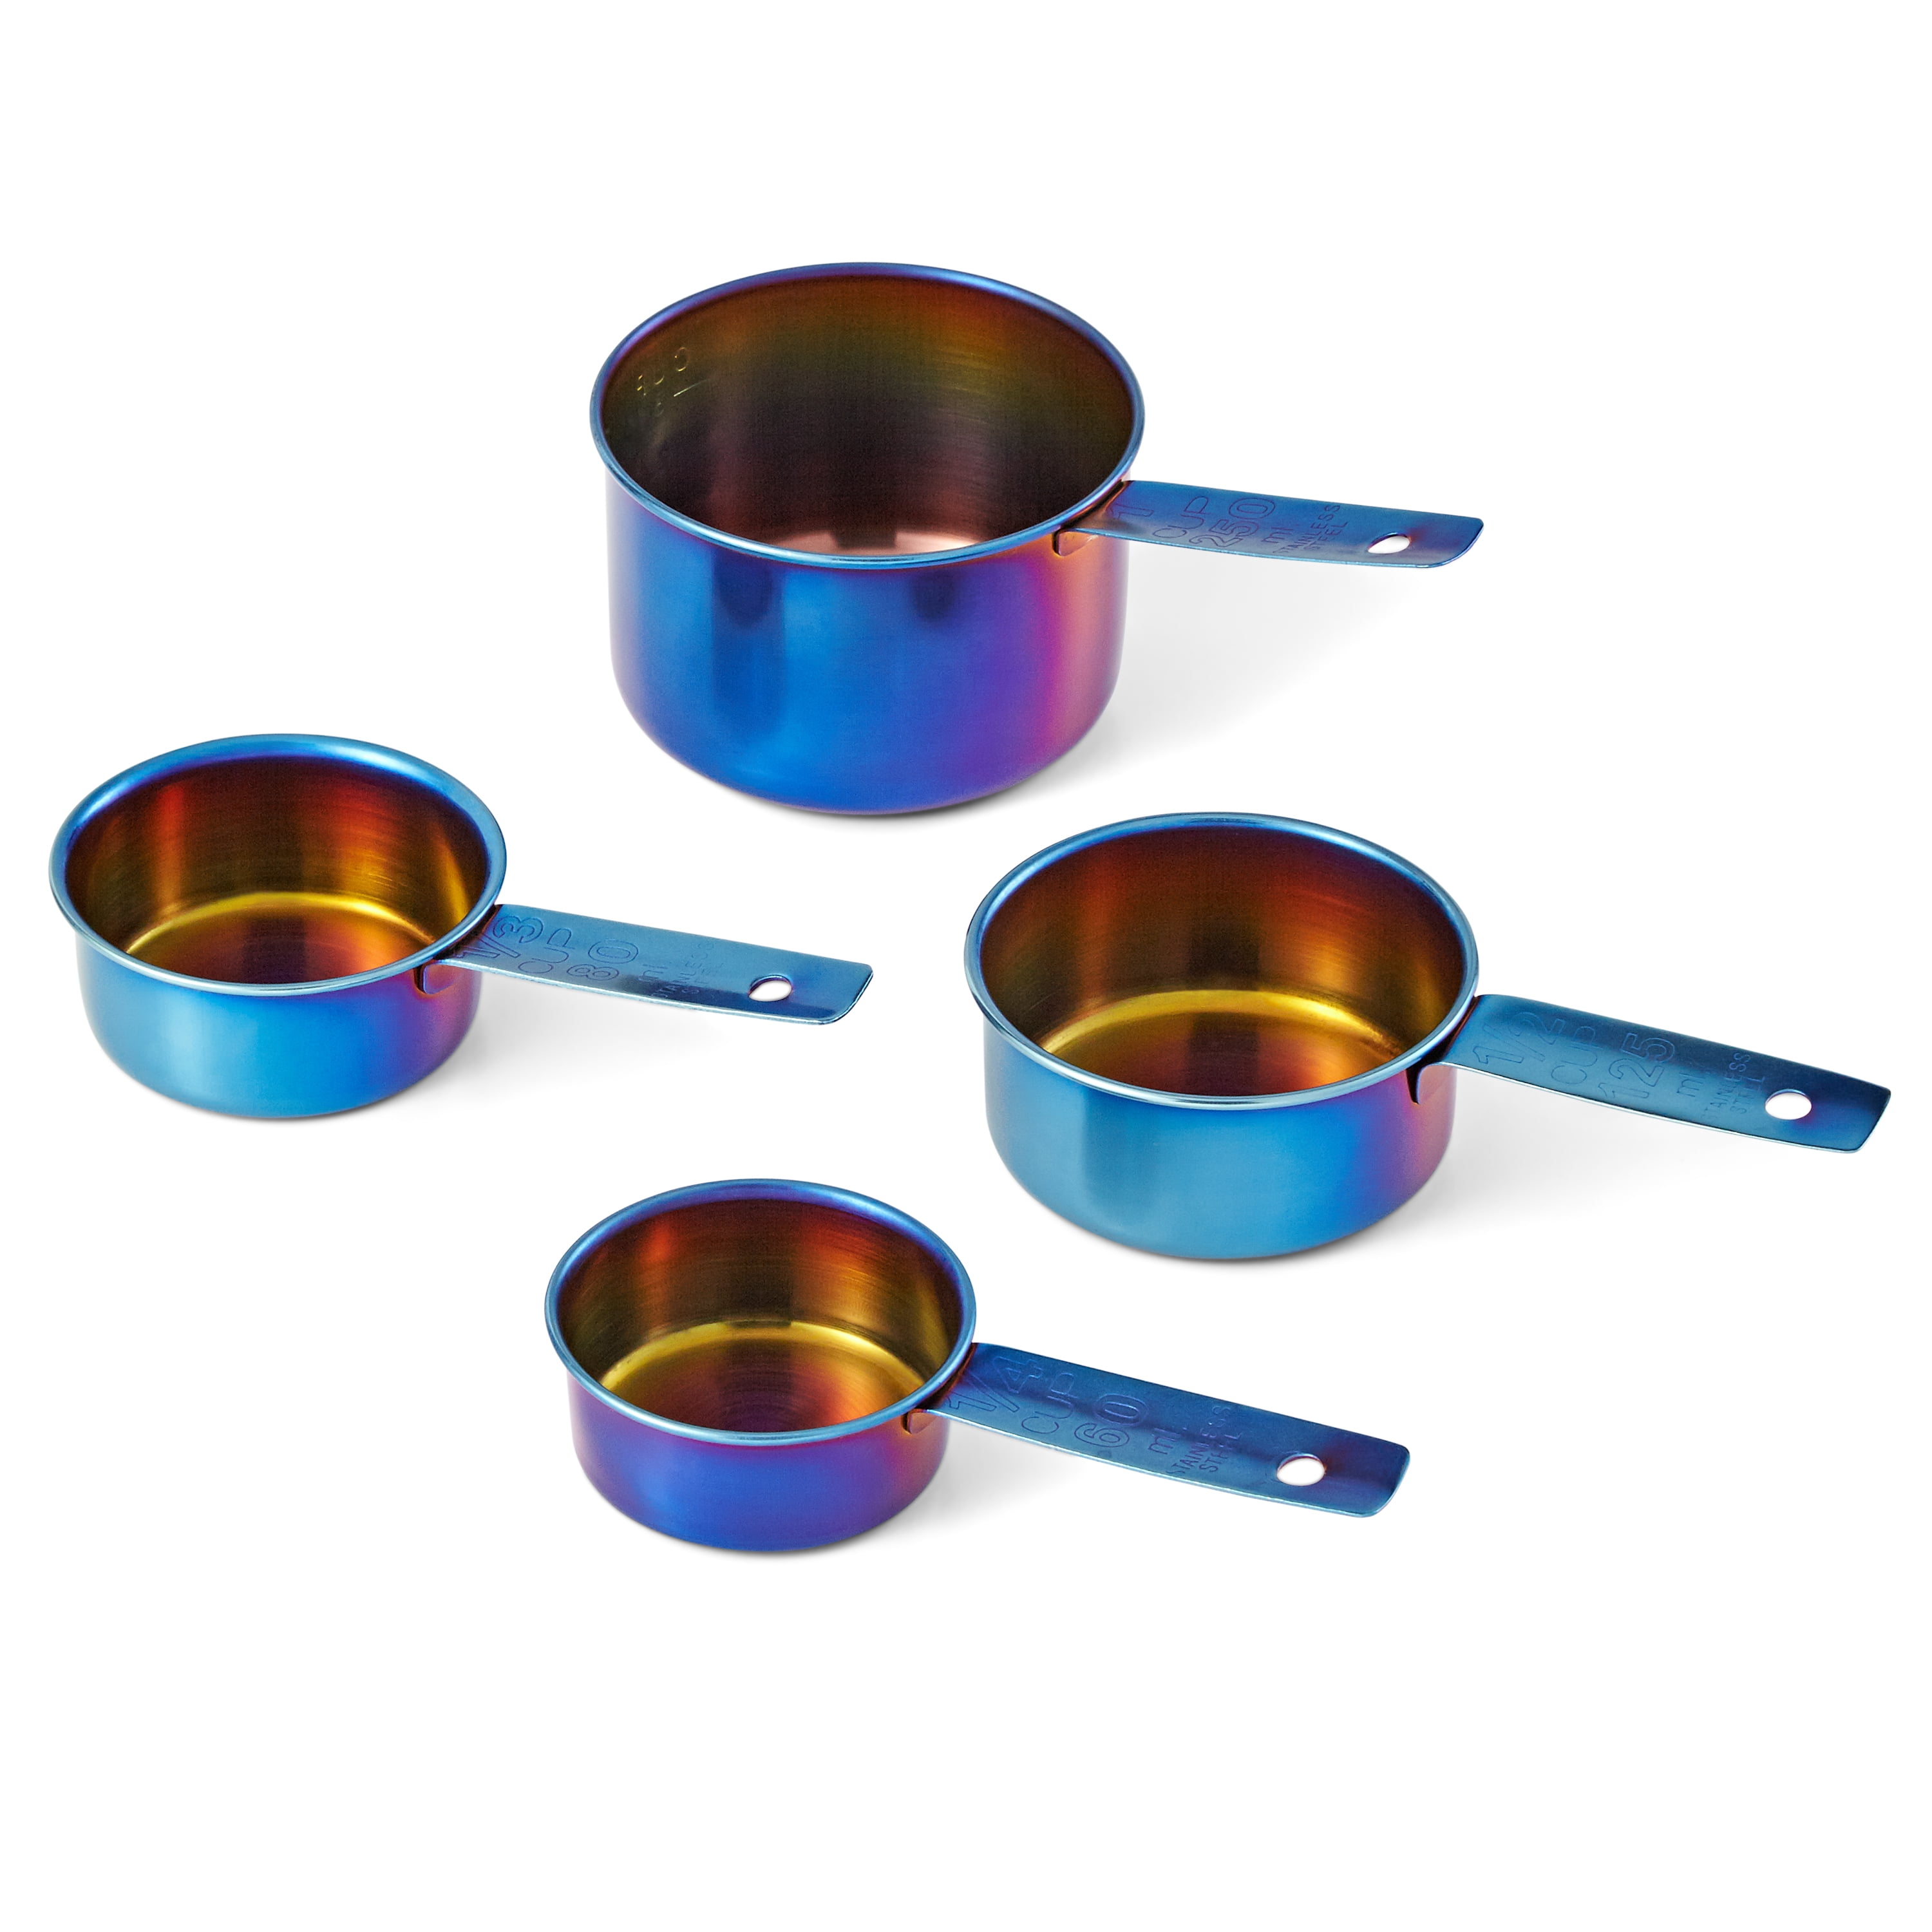 Mainstays Iridescent Stainless Steel 20-Piece Cookware Set, with Kitchen Utensils and Tools - 2